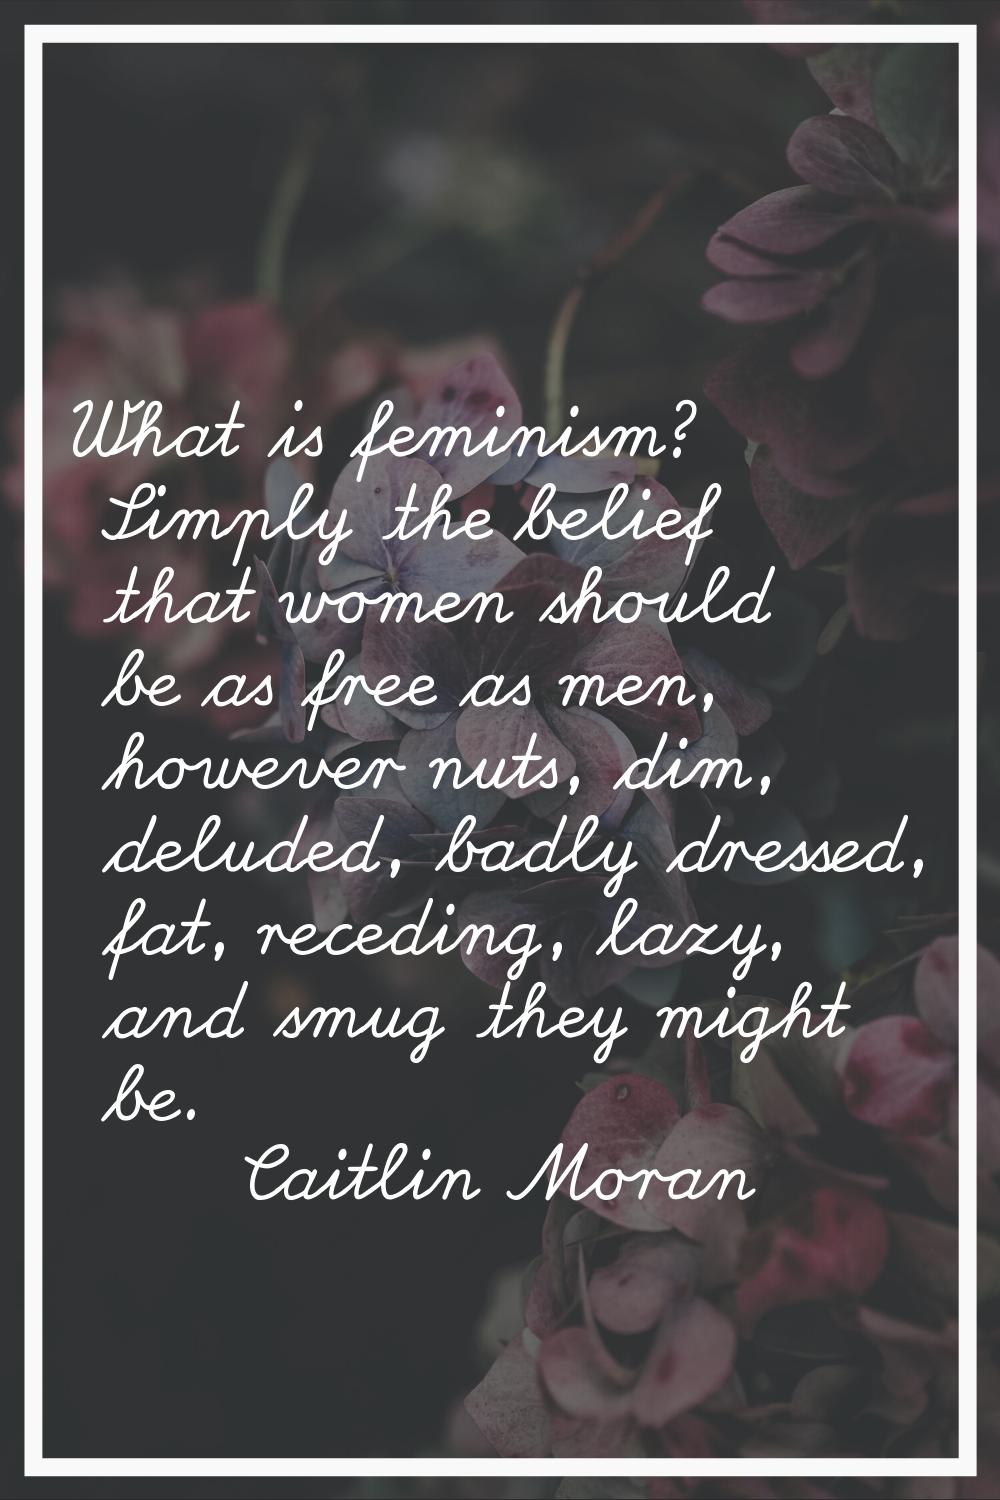 What is feminism? Simply the belief that women should be as free as men, however nuts, dim, deluded